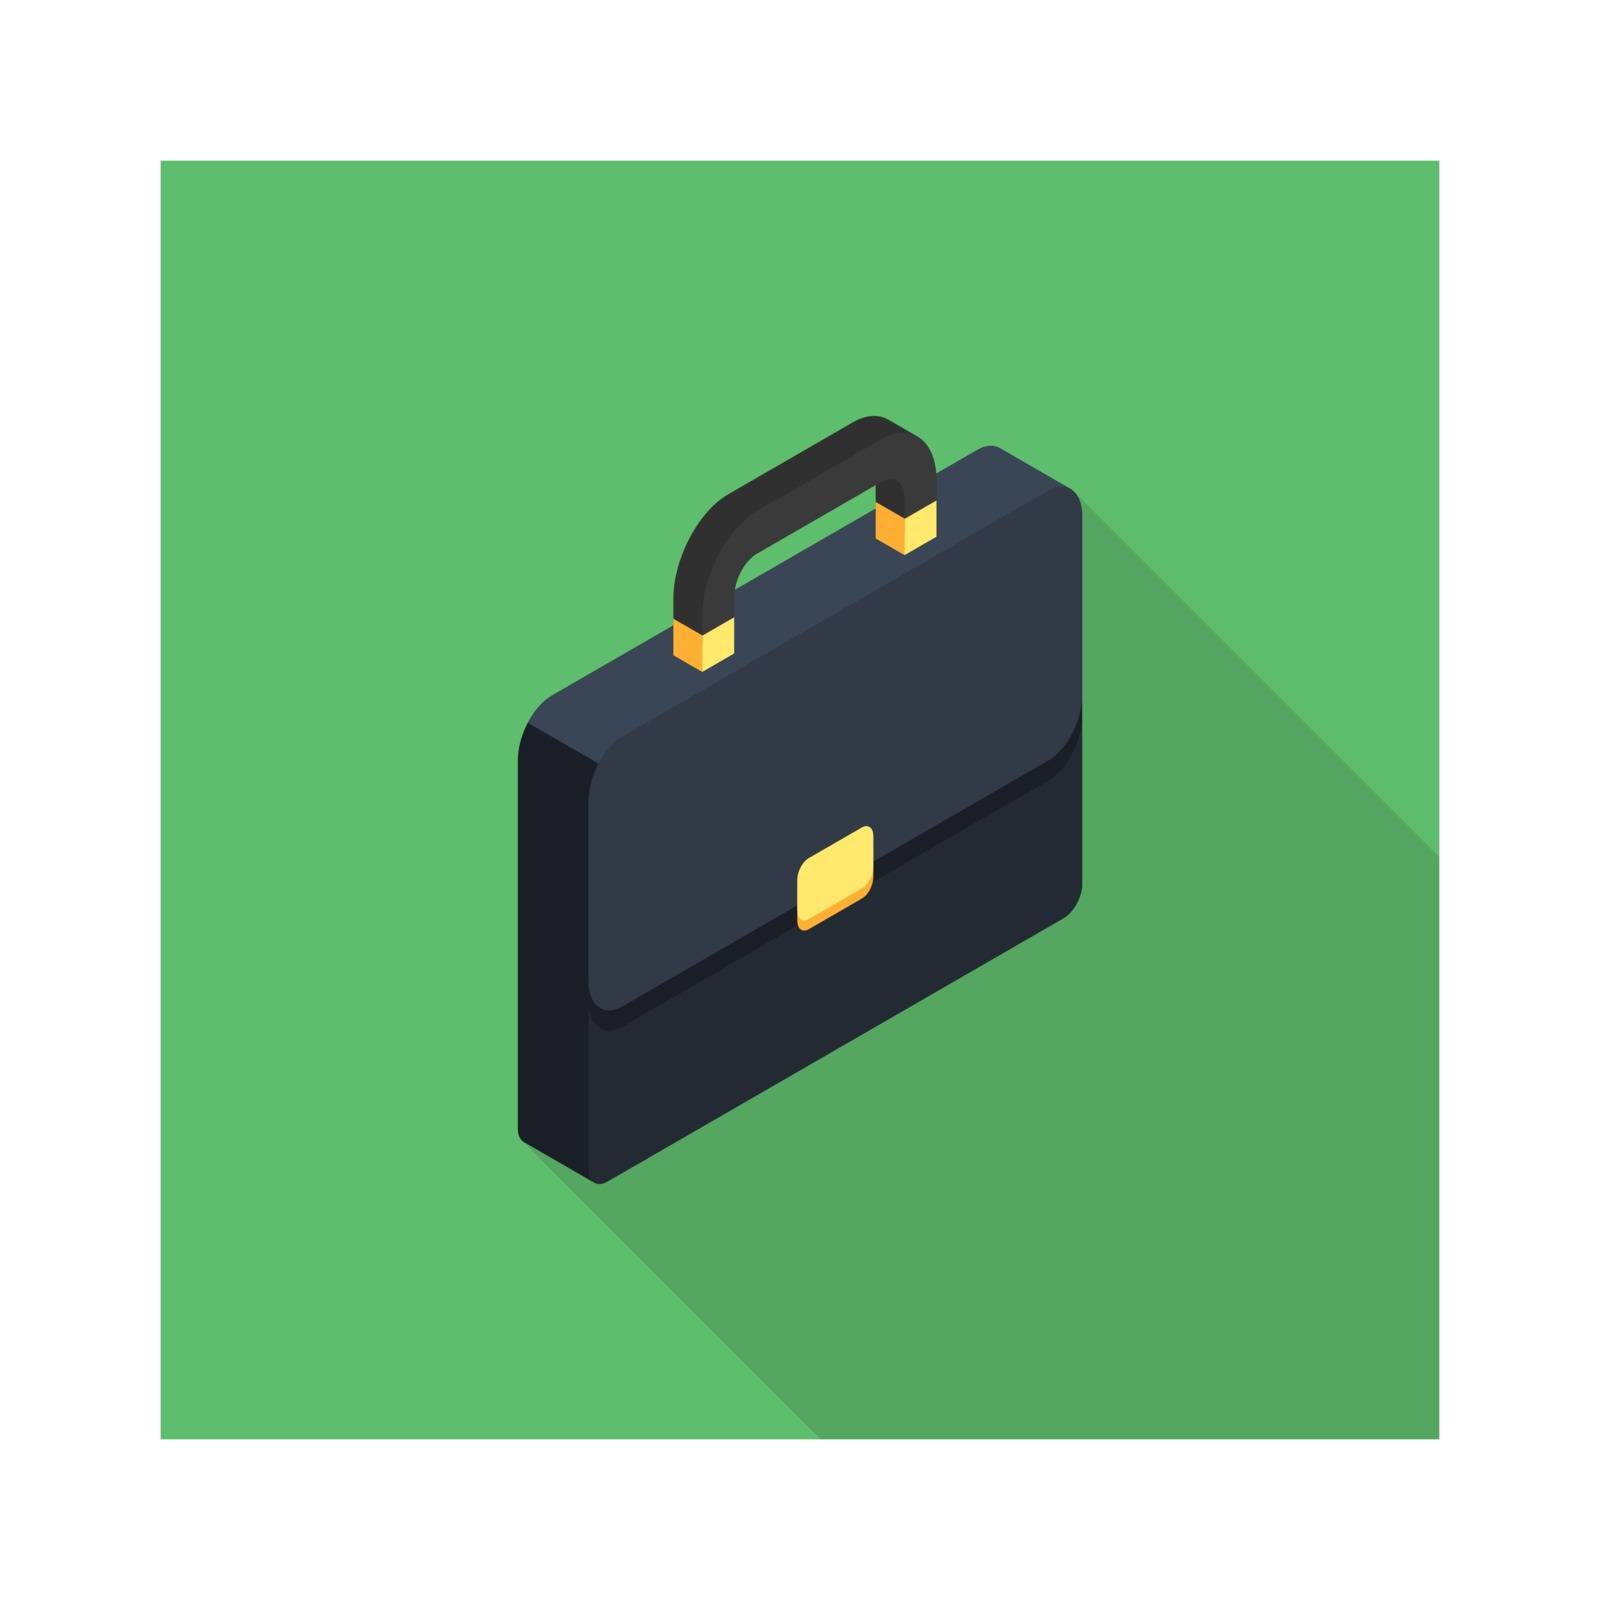 Briefcase right view icon vector isometric. Flat style vector illustration.